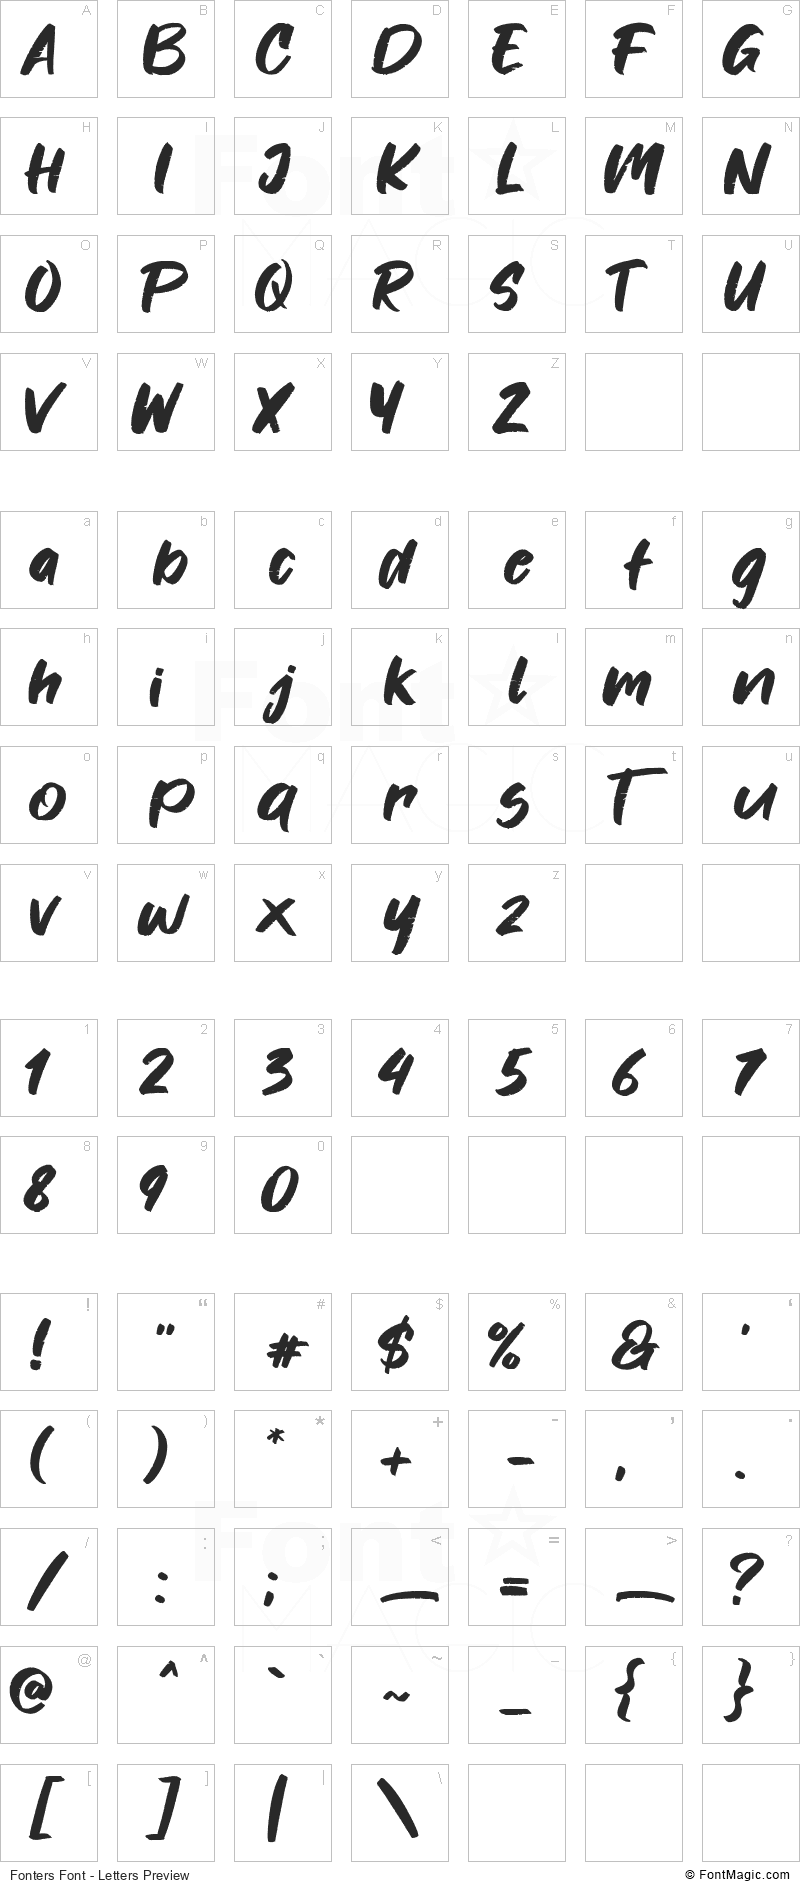 Fonters Font - All Latters Preview Chart